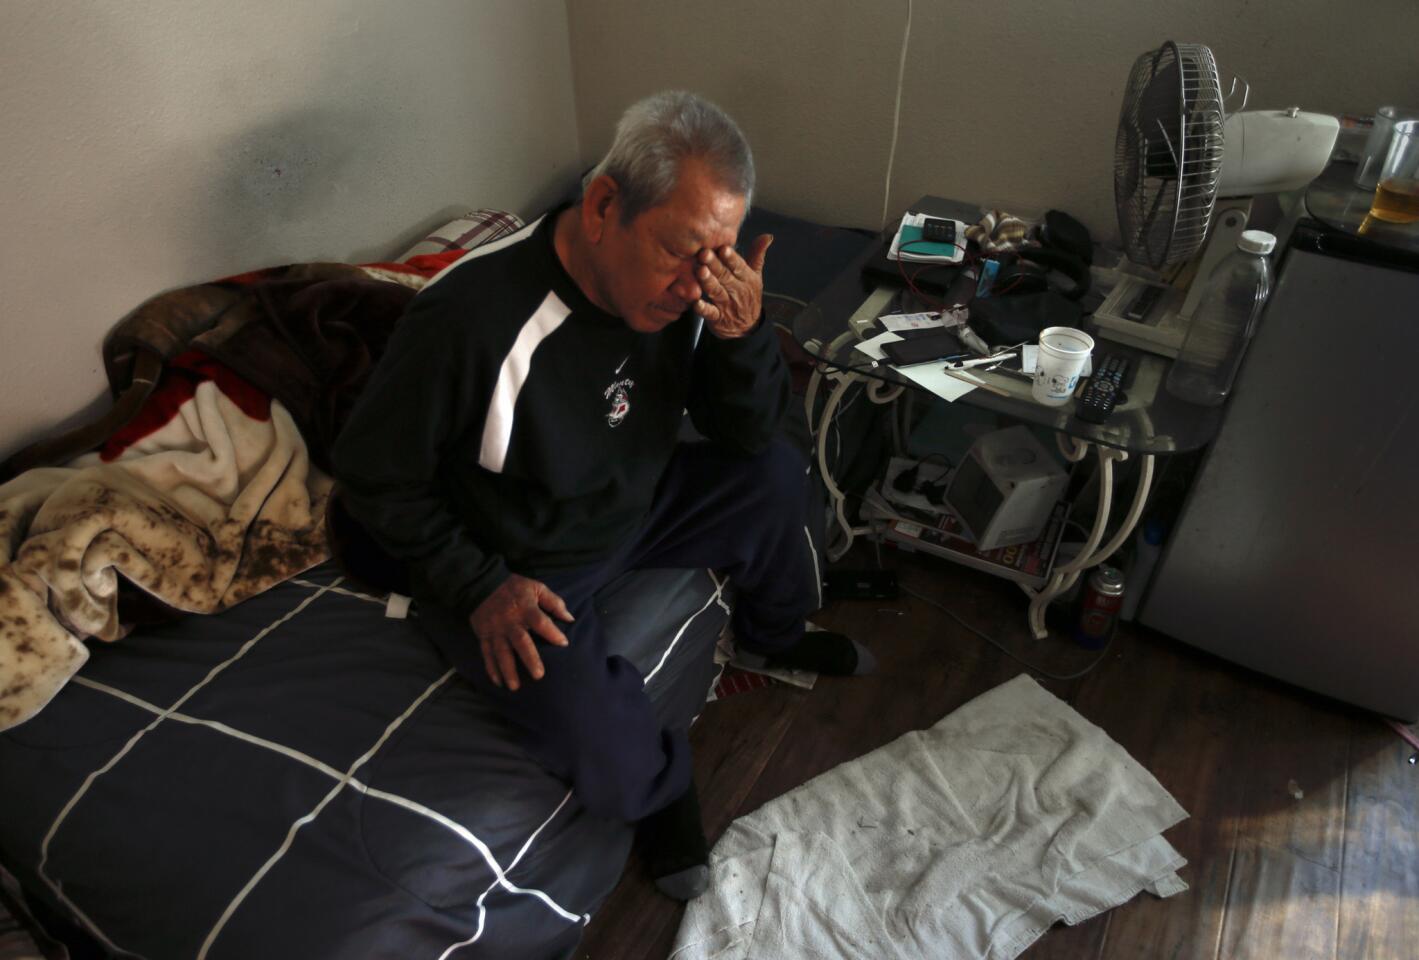 Cab driver Long Ma spends many days alone with his thoughts in his small rented room in Garden Grove.